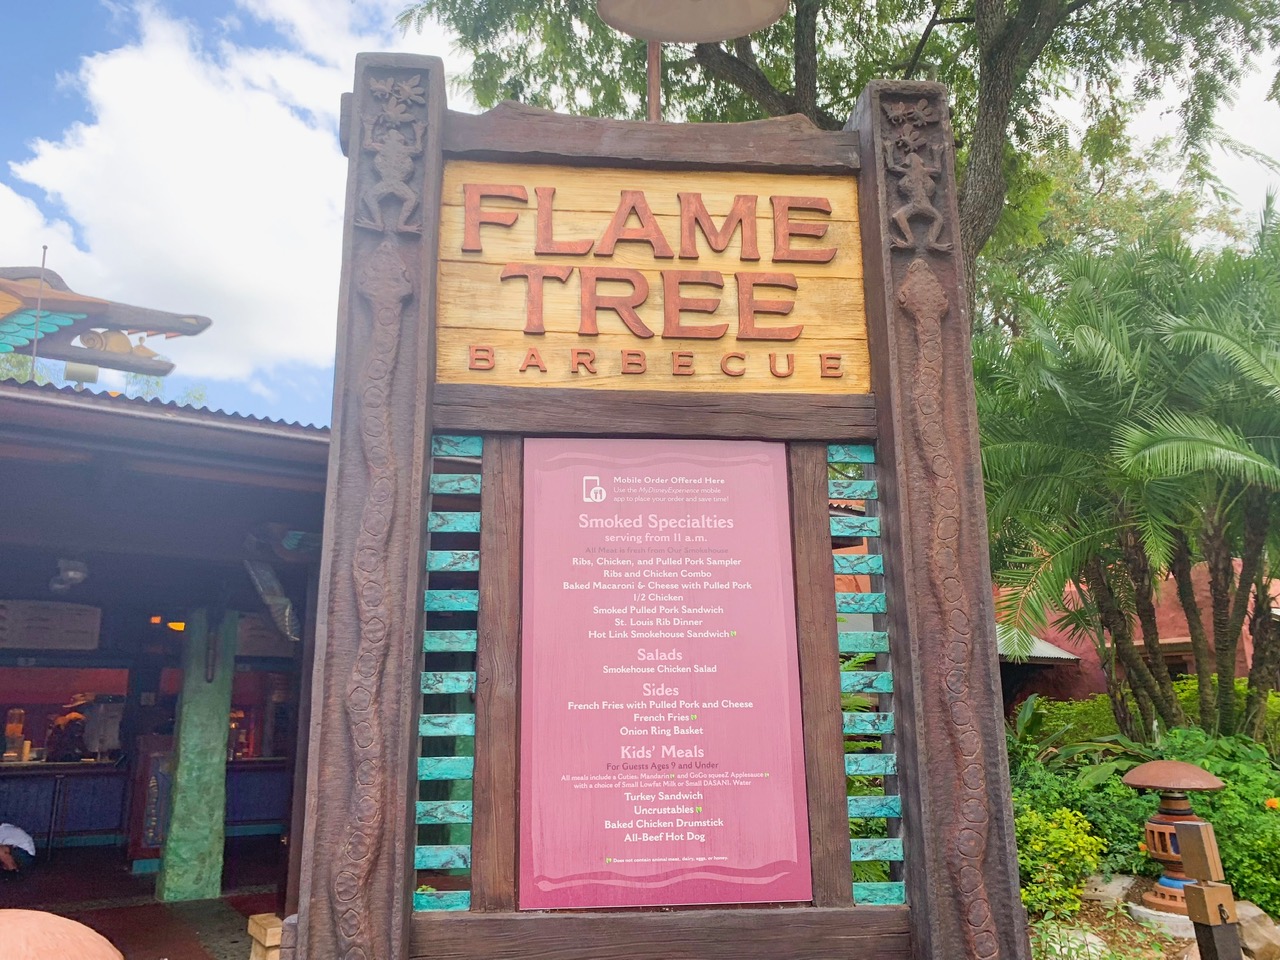 Flame Tree Barbecue Sign and menu in front of trees Animal Kingdom quick service